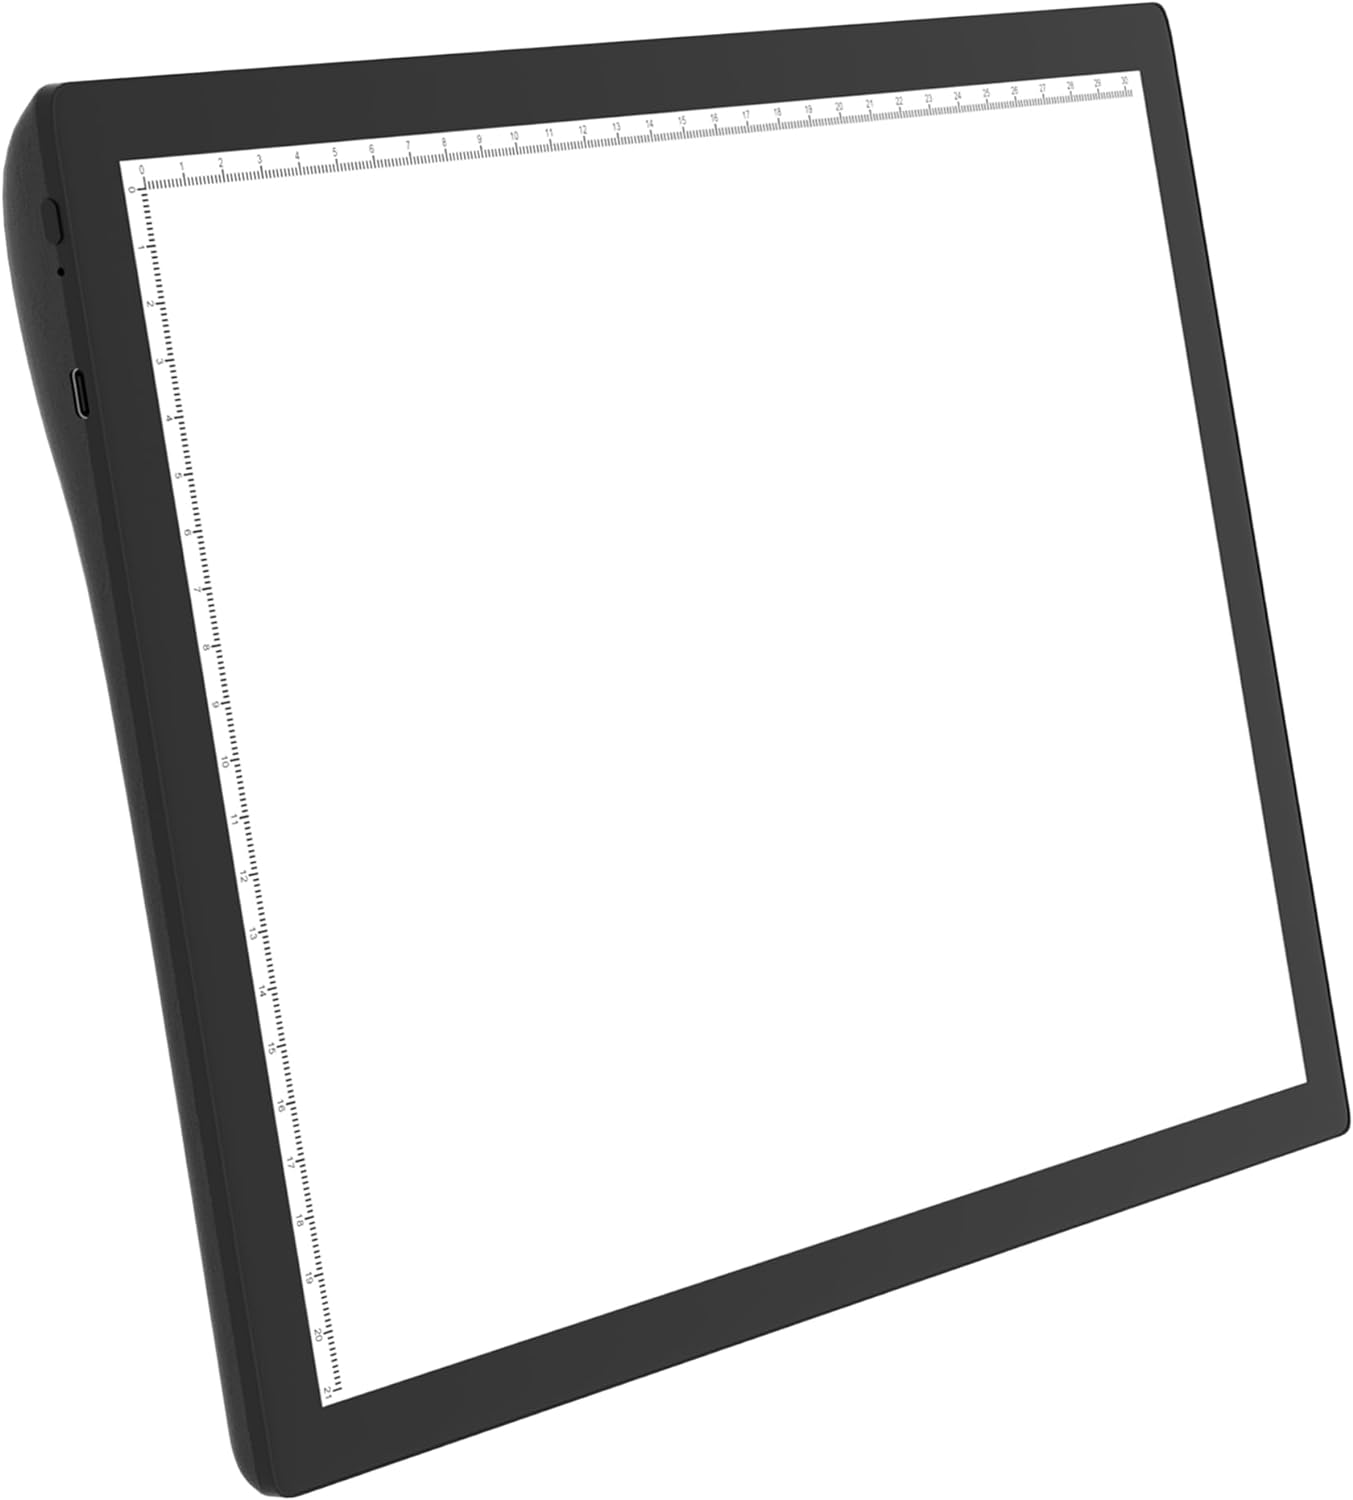 Rechargeable Light Box A4 Drawing Pad for Kids